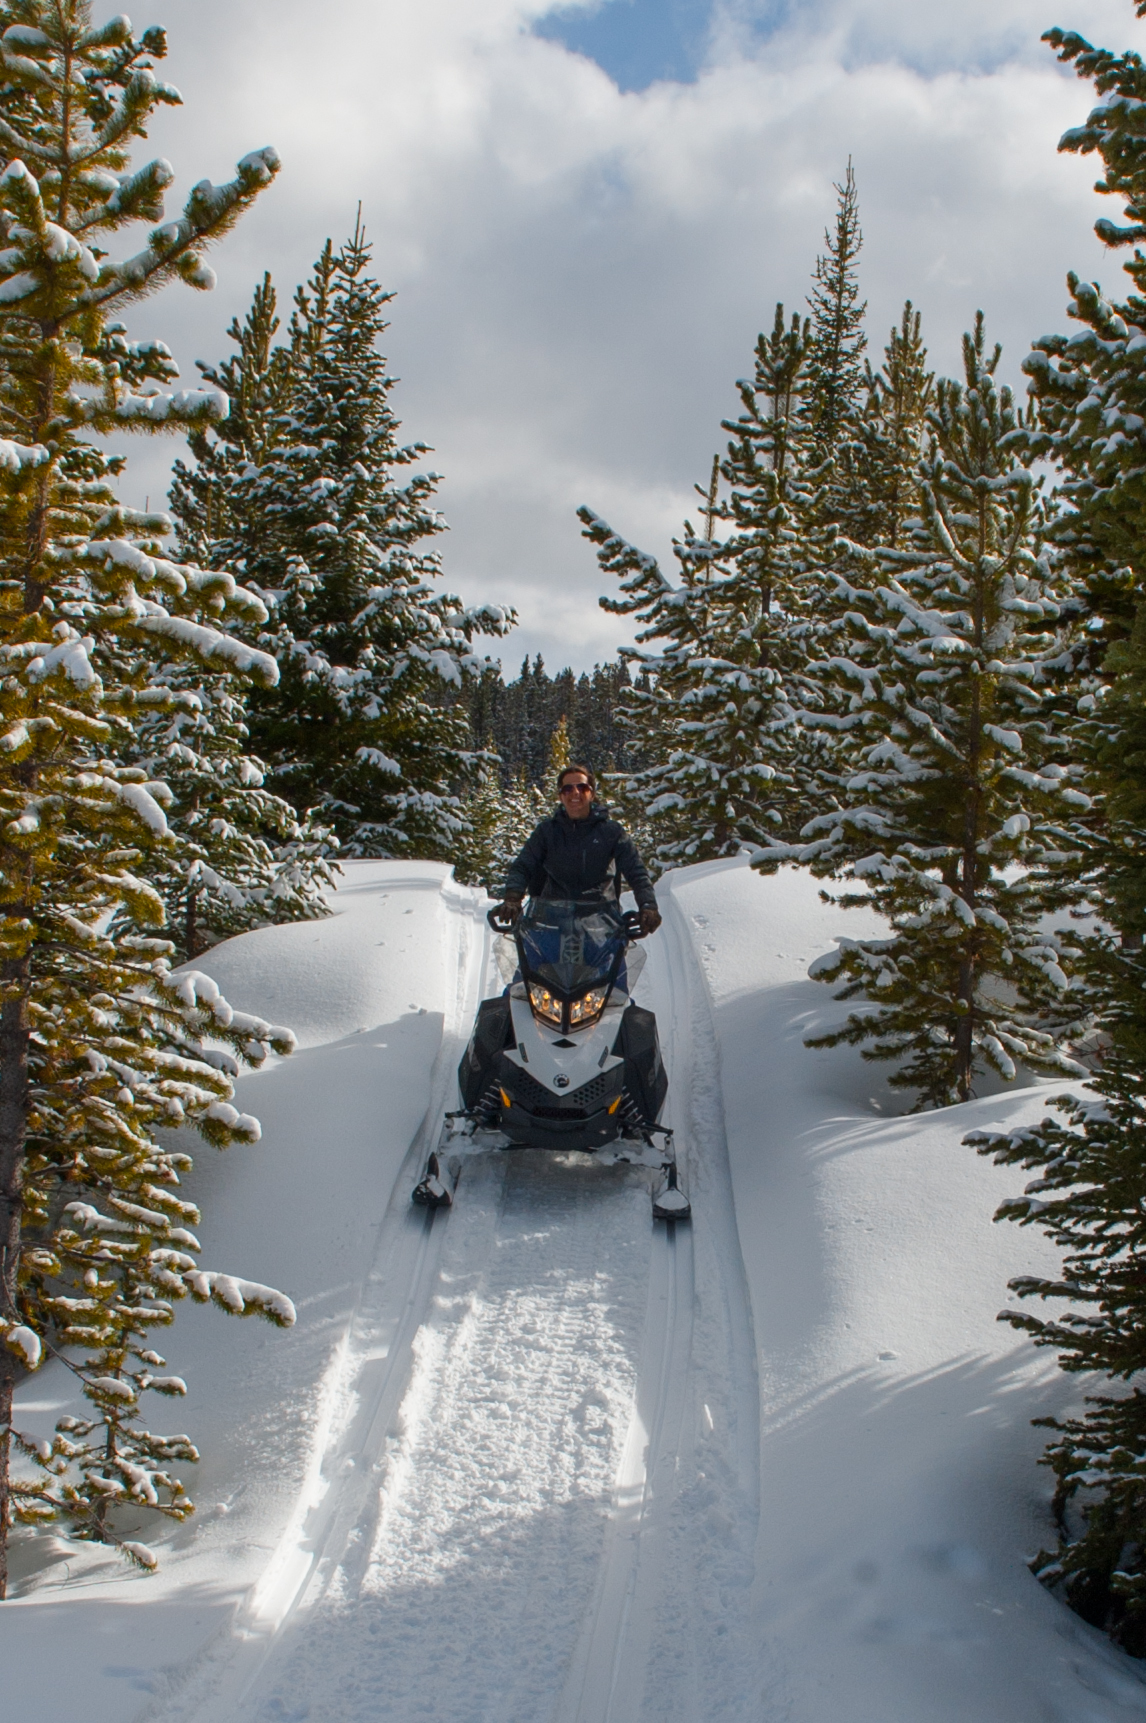 Ranches at Belt Creek Snowmobile day